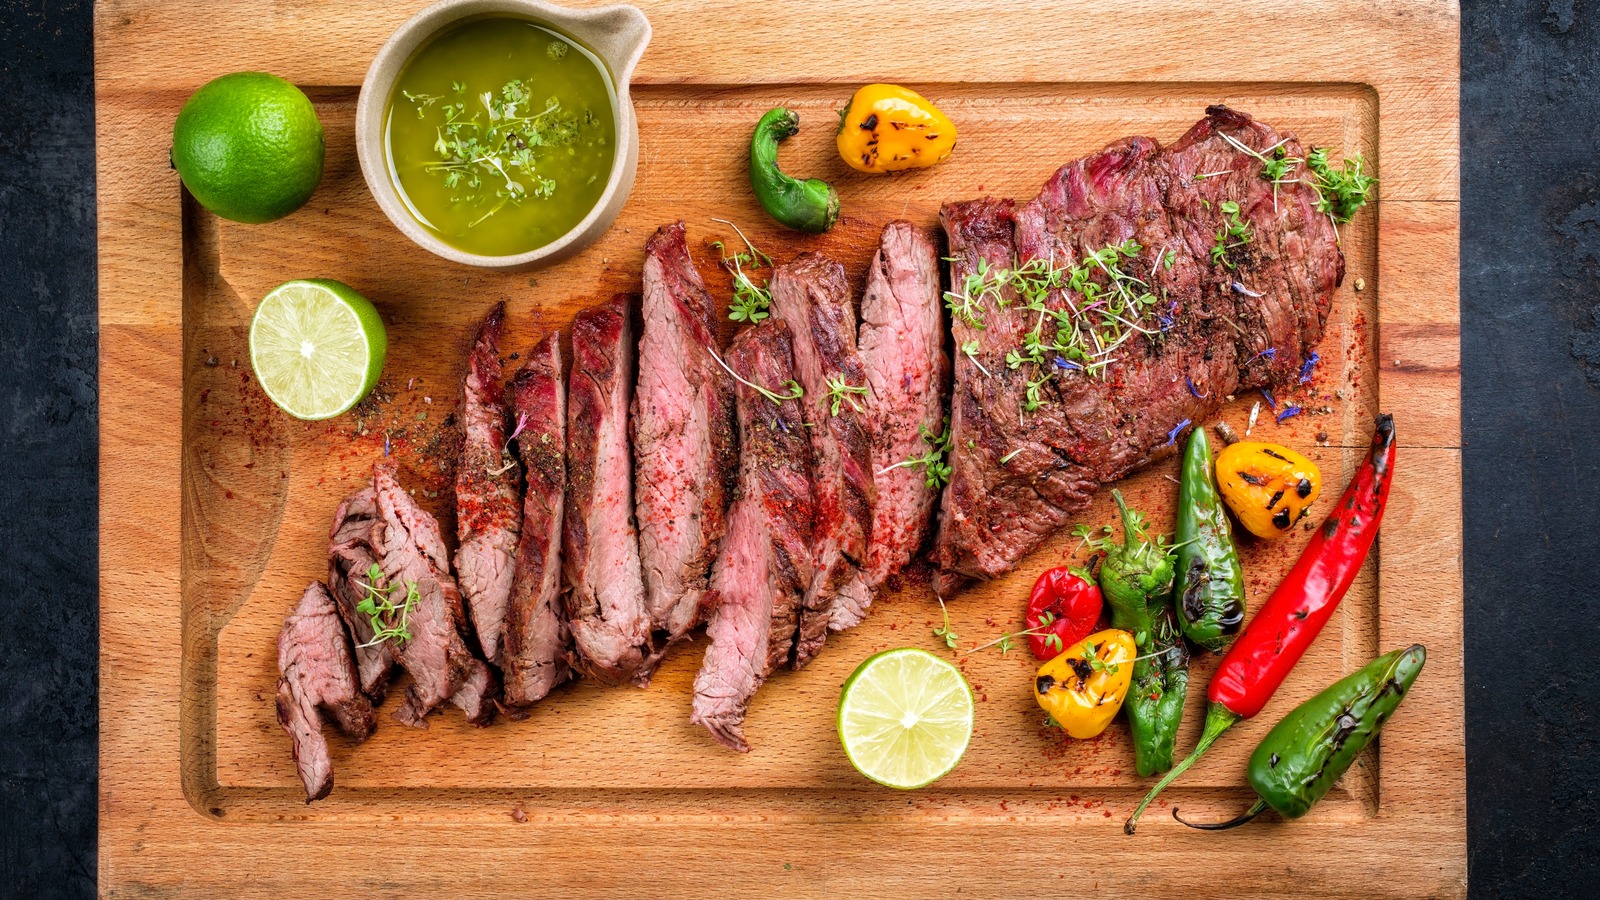 What is Bavette steak called in American grocery stores?